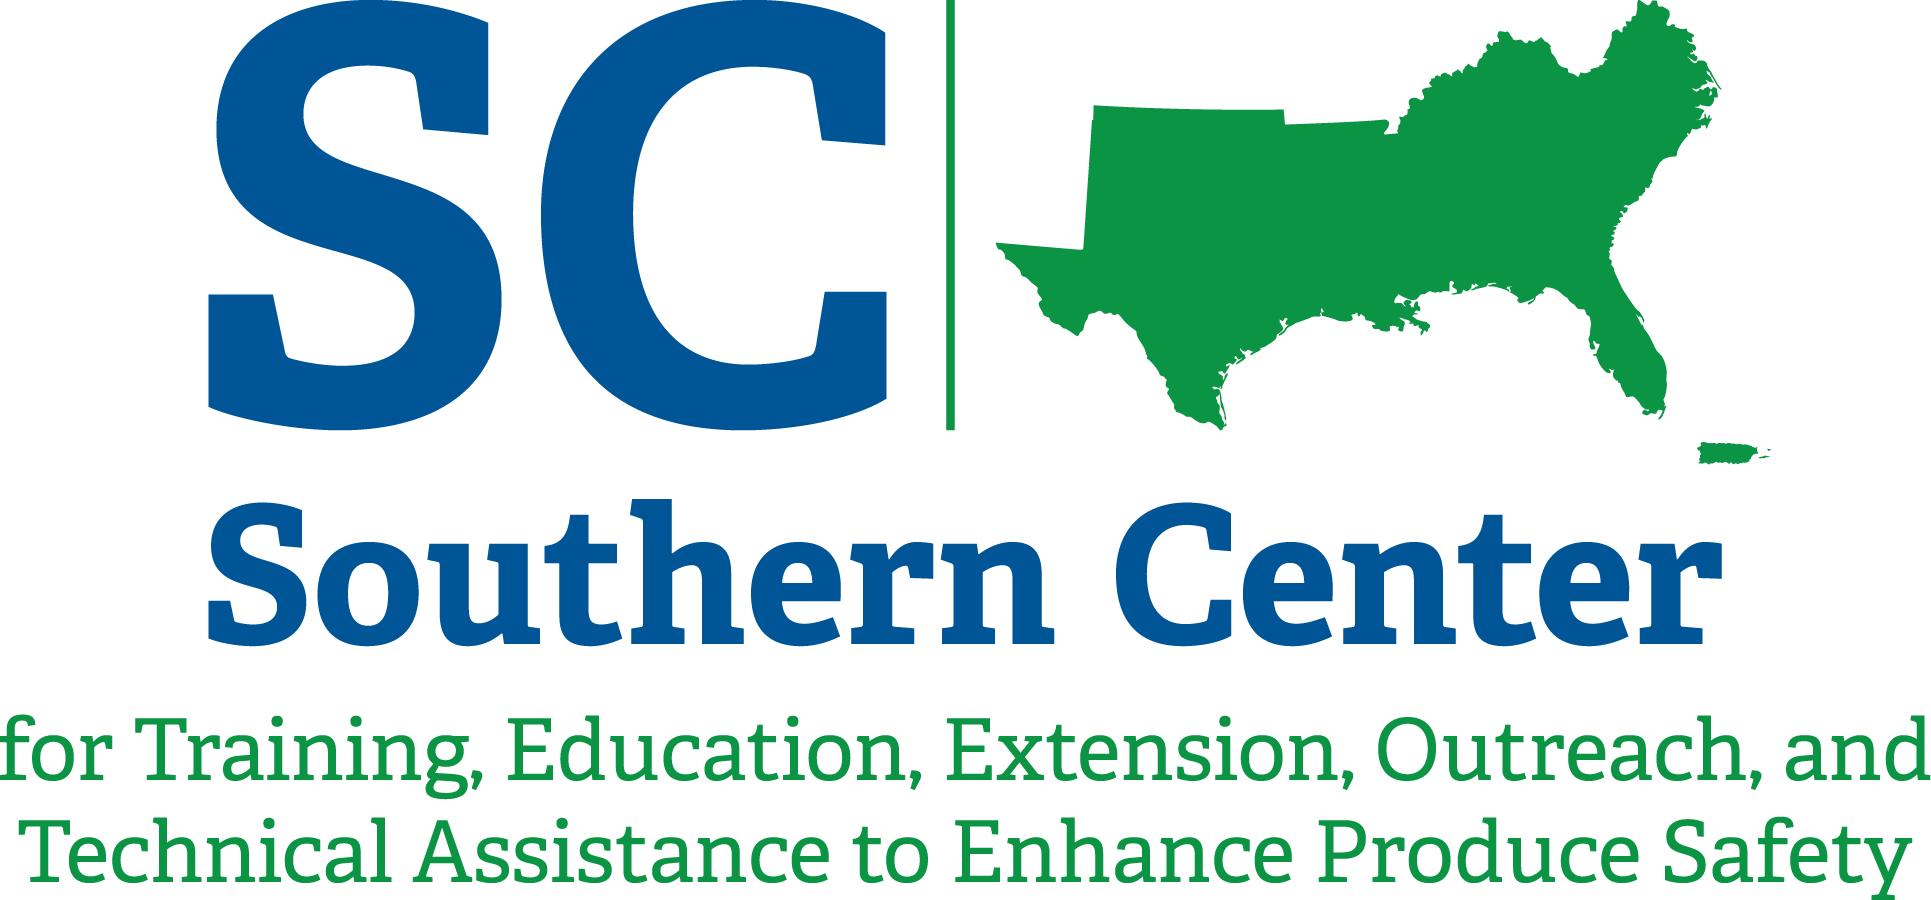 Logo: Southern Center for Training, Education, Extension Outreach, and Technical Assistance to Enhance Produce Safety